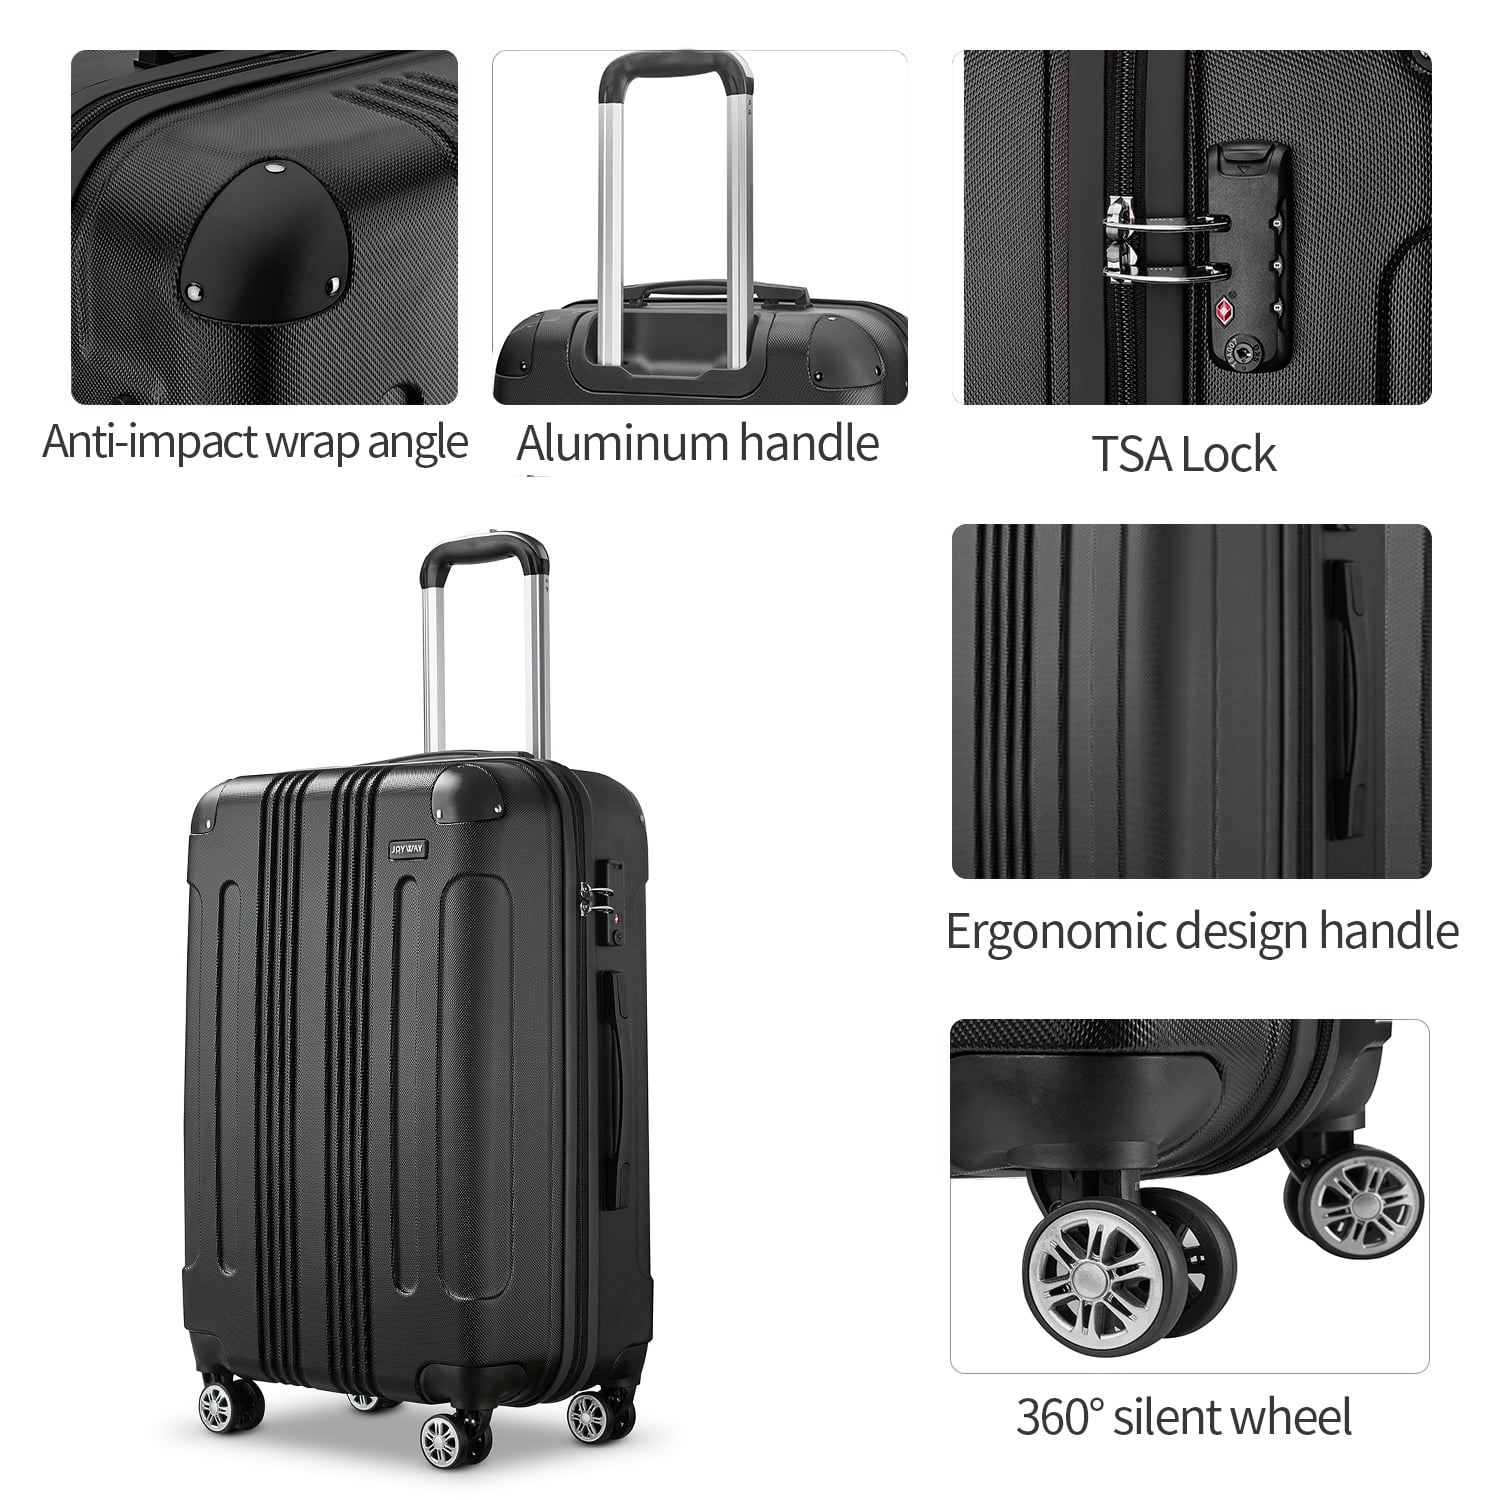 Joyway Luggage 10-Piece Sets,ABS Hardside Suitcase with Spinner Wheels,TSA Lock Luggage Sets for Women and Men Black&Green 